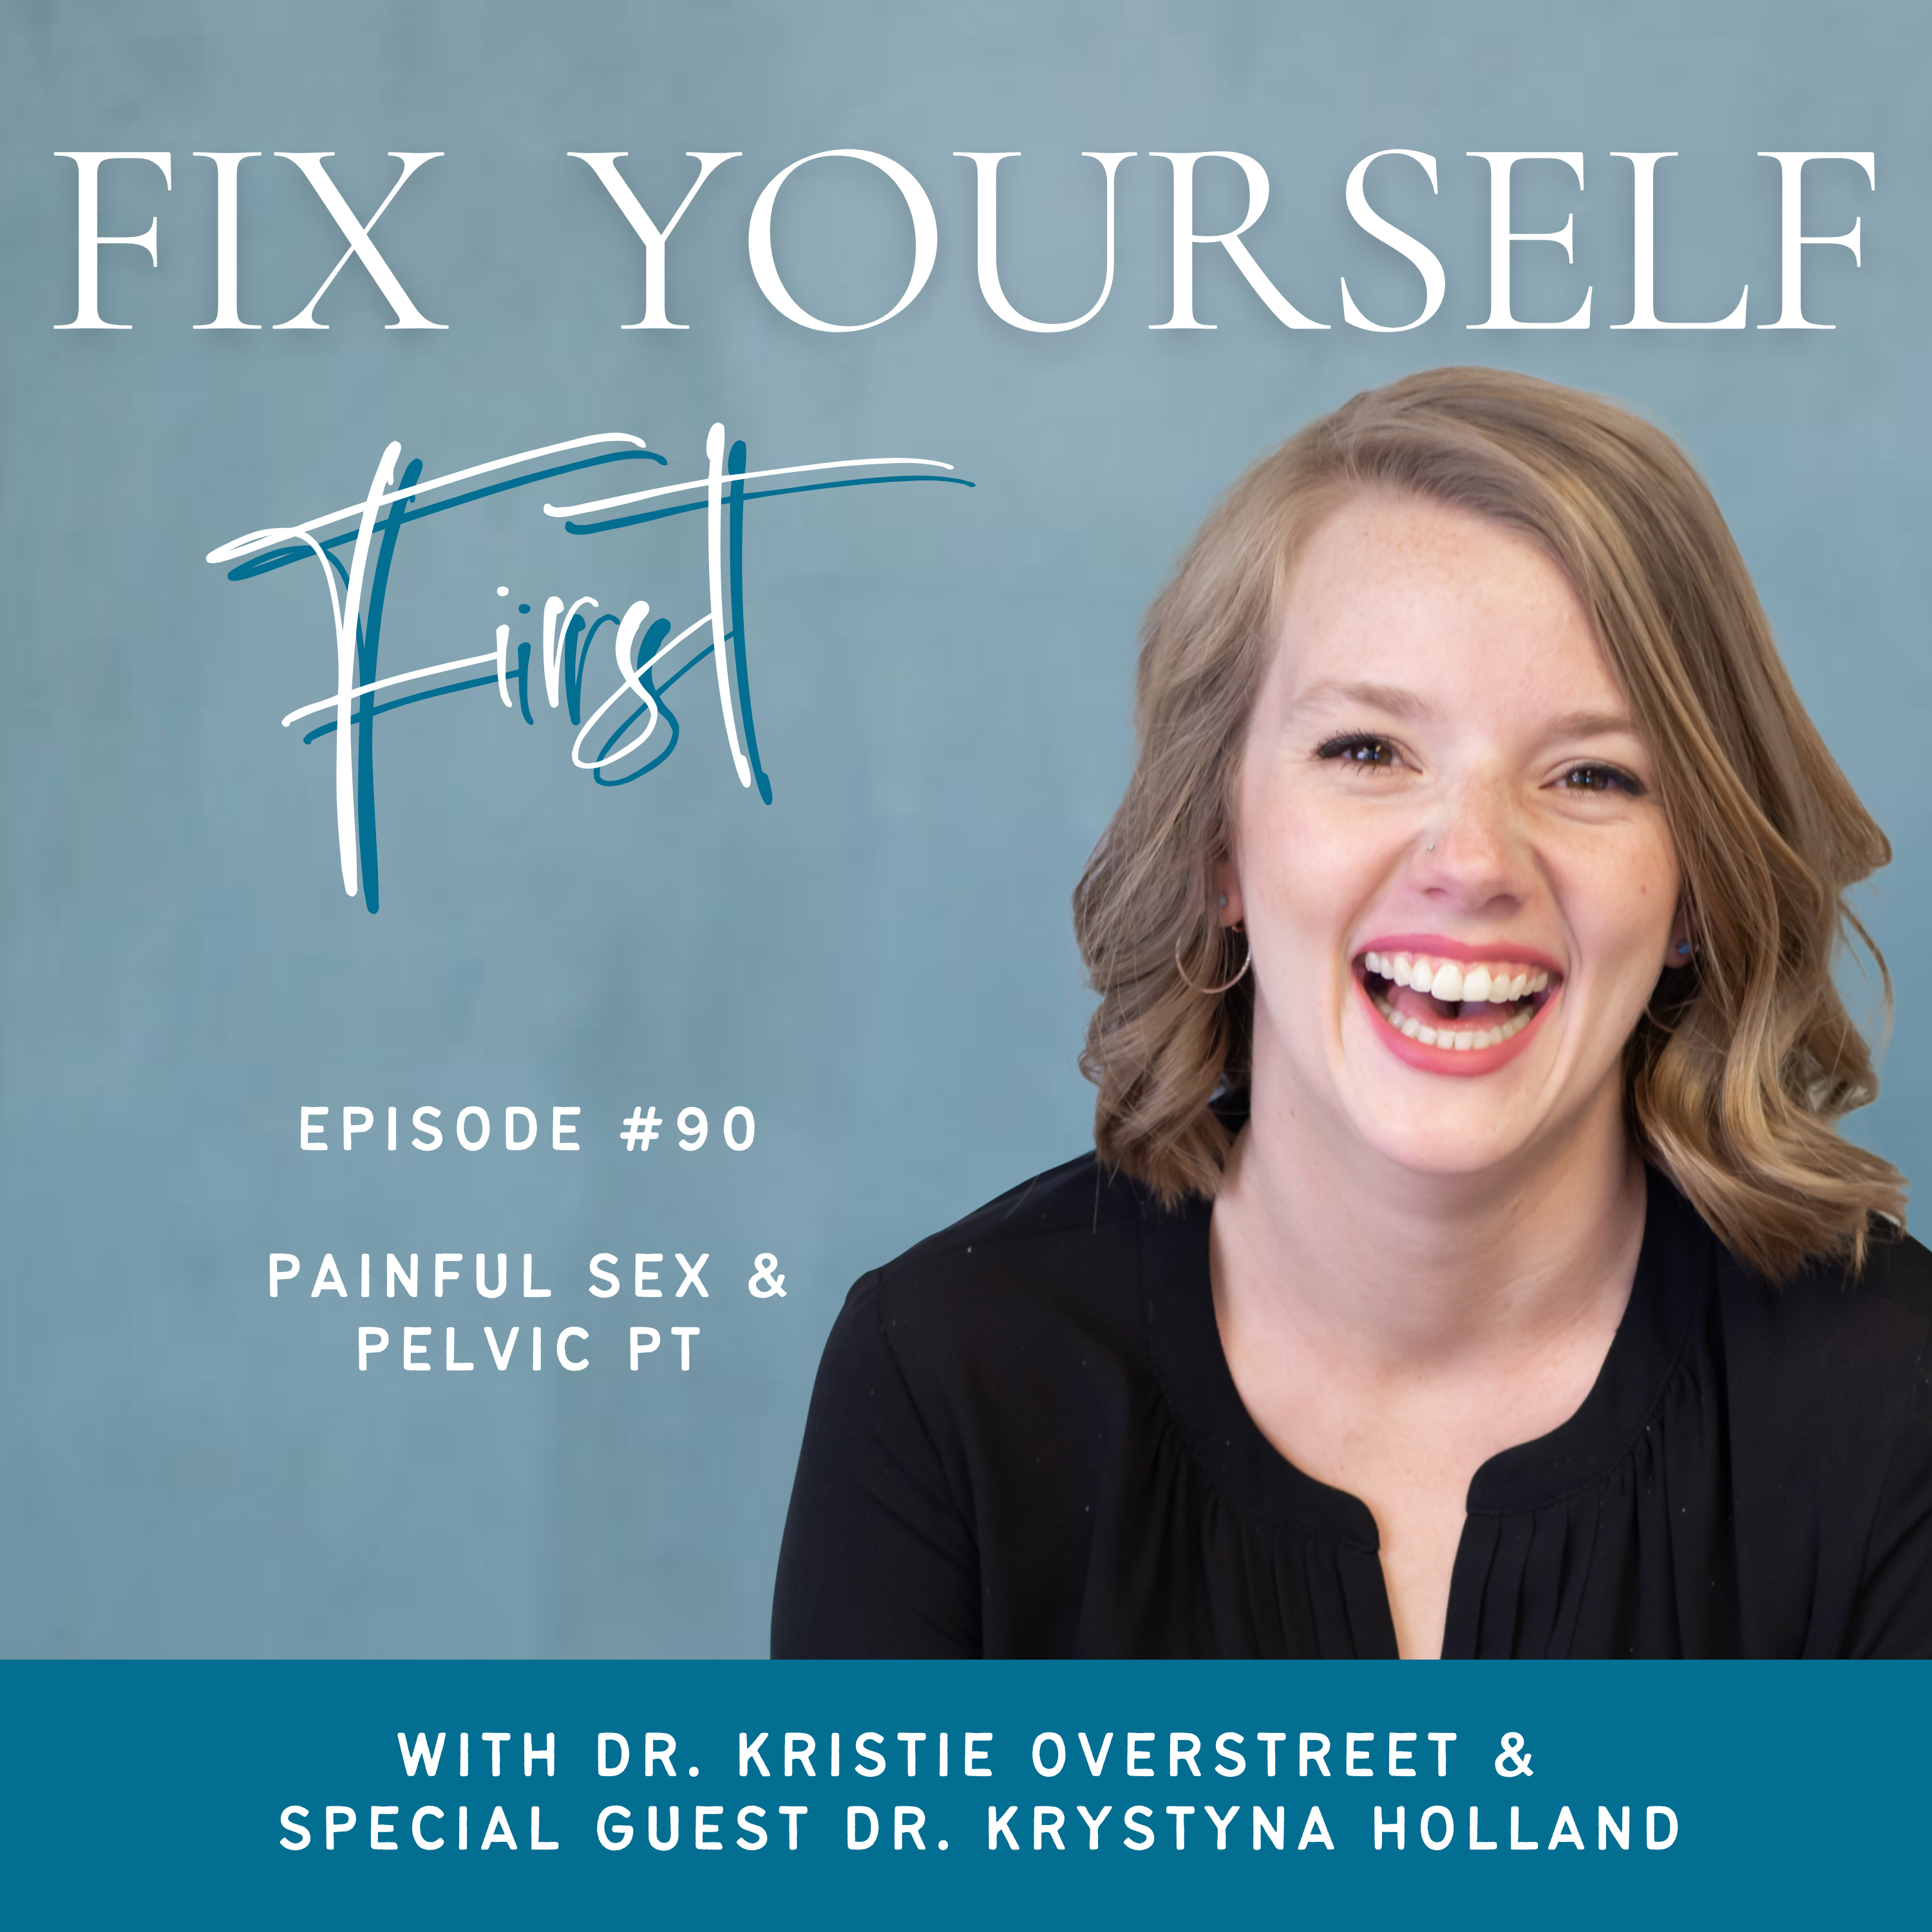 Fix Yourself First Episode 90 Painful Sex & Pelvic PT with Dr. Krystyna Holland